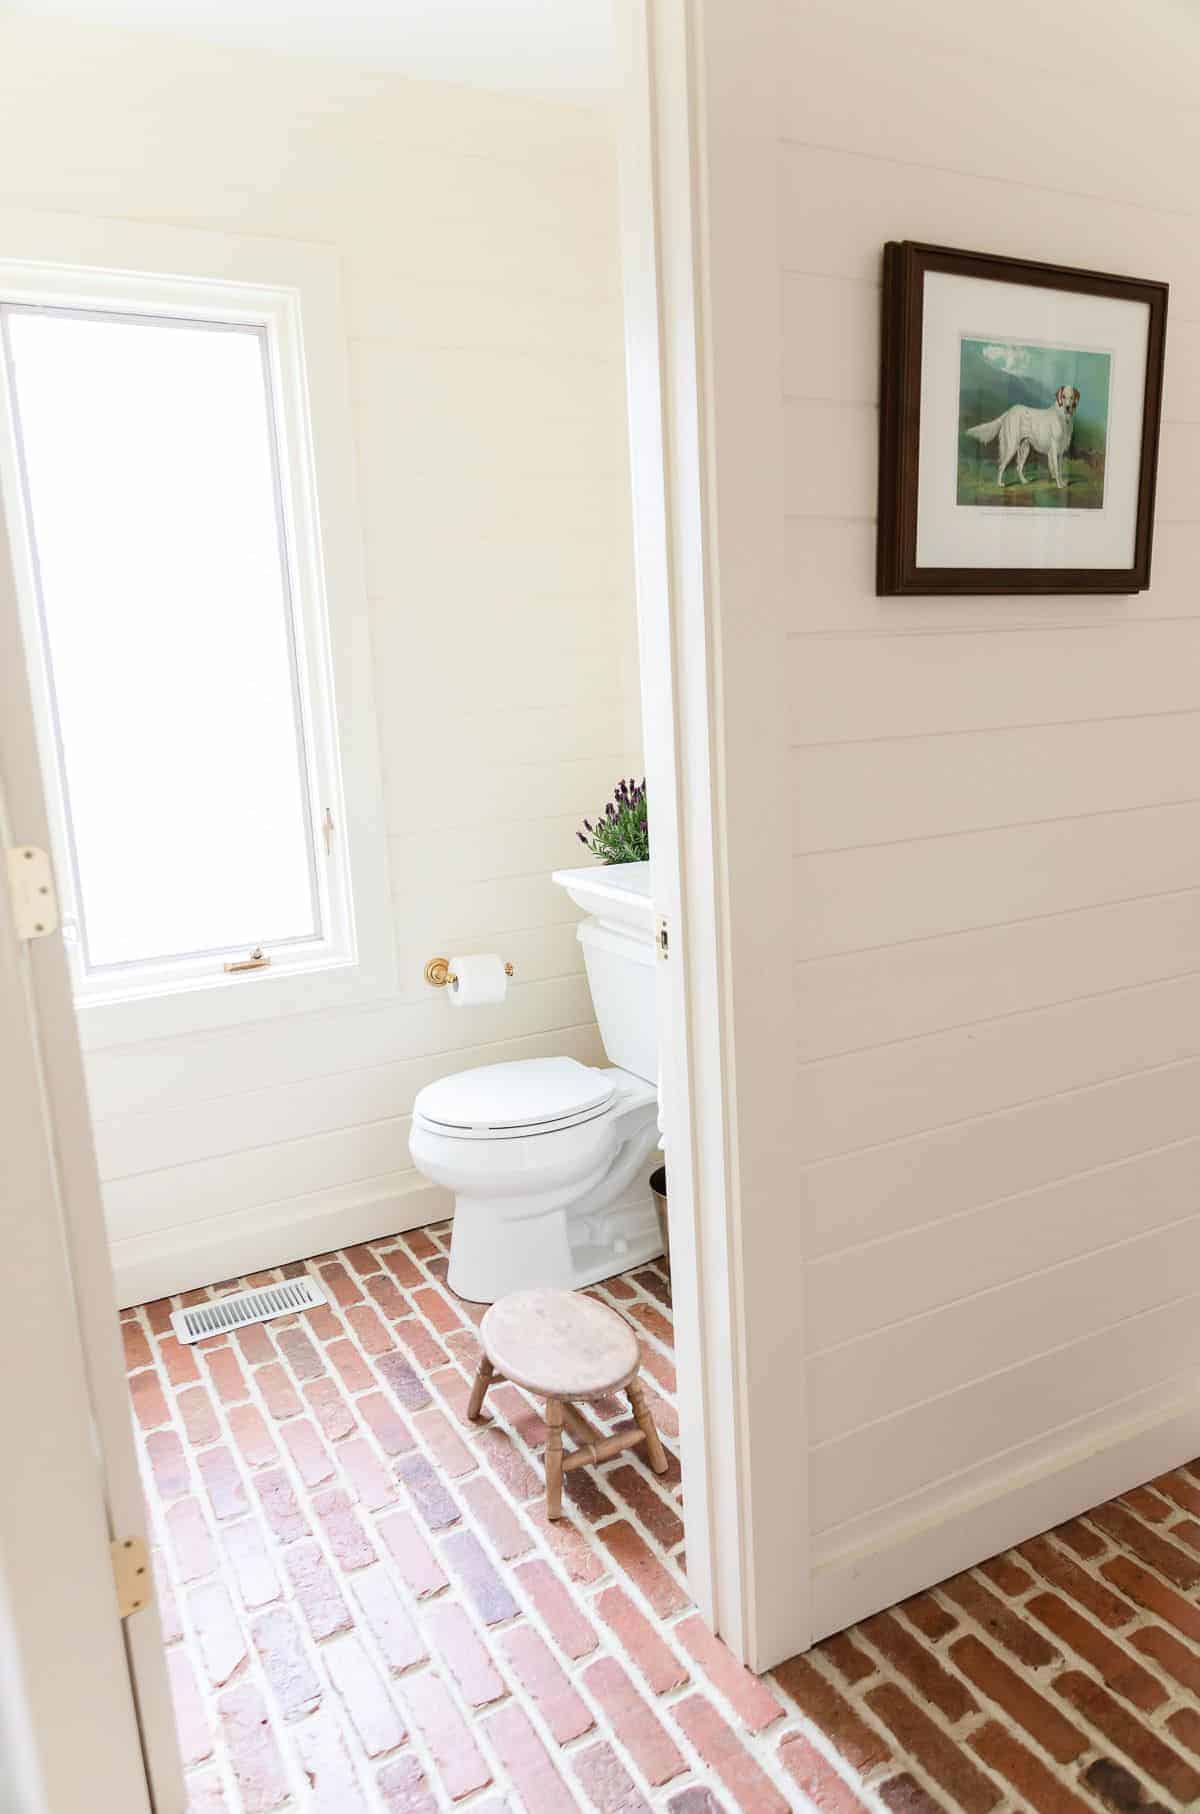 A guest bathroom with horizontal cedar paneling and brick floors, a pot of lavandula stoechas on the back of the toilet .